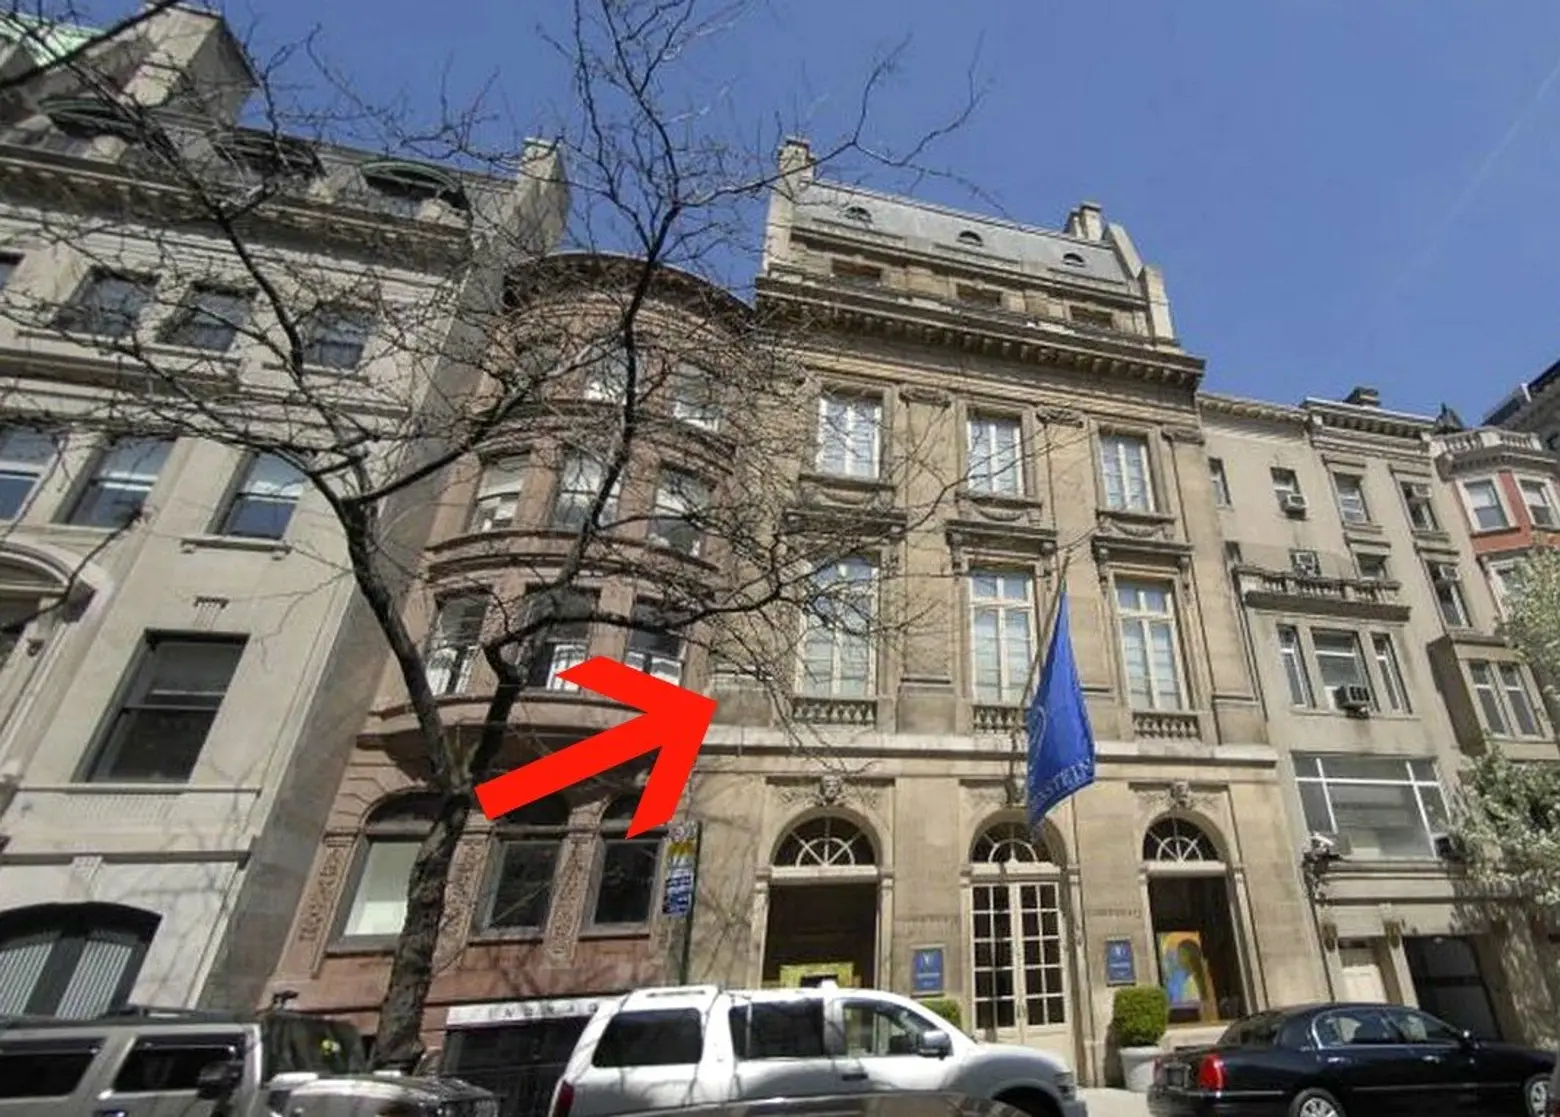 Upper East Side townhouse in contract for $81M will be most expensive ever sold